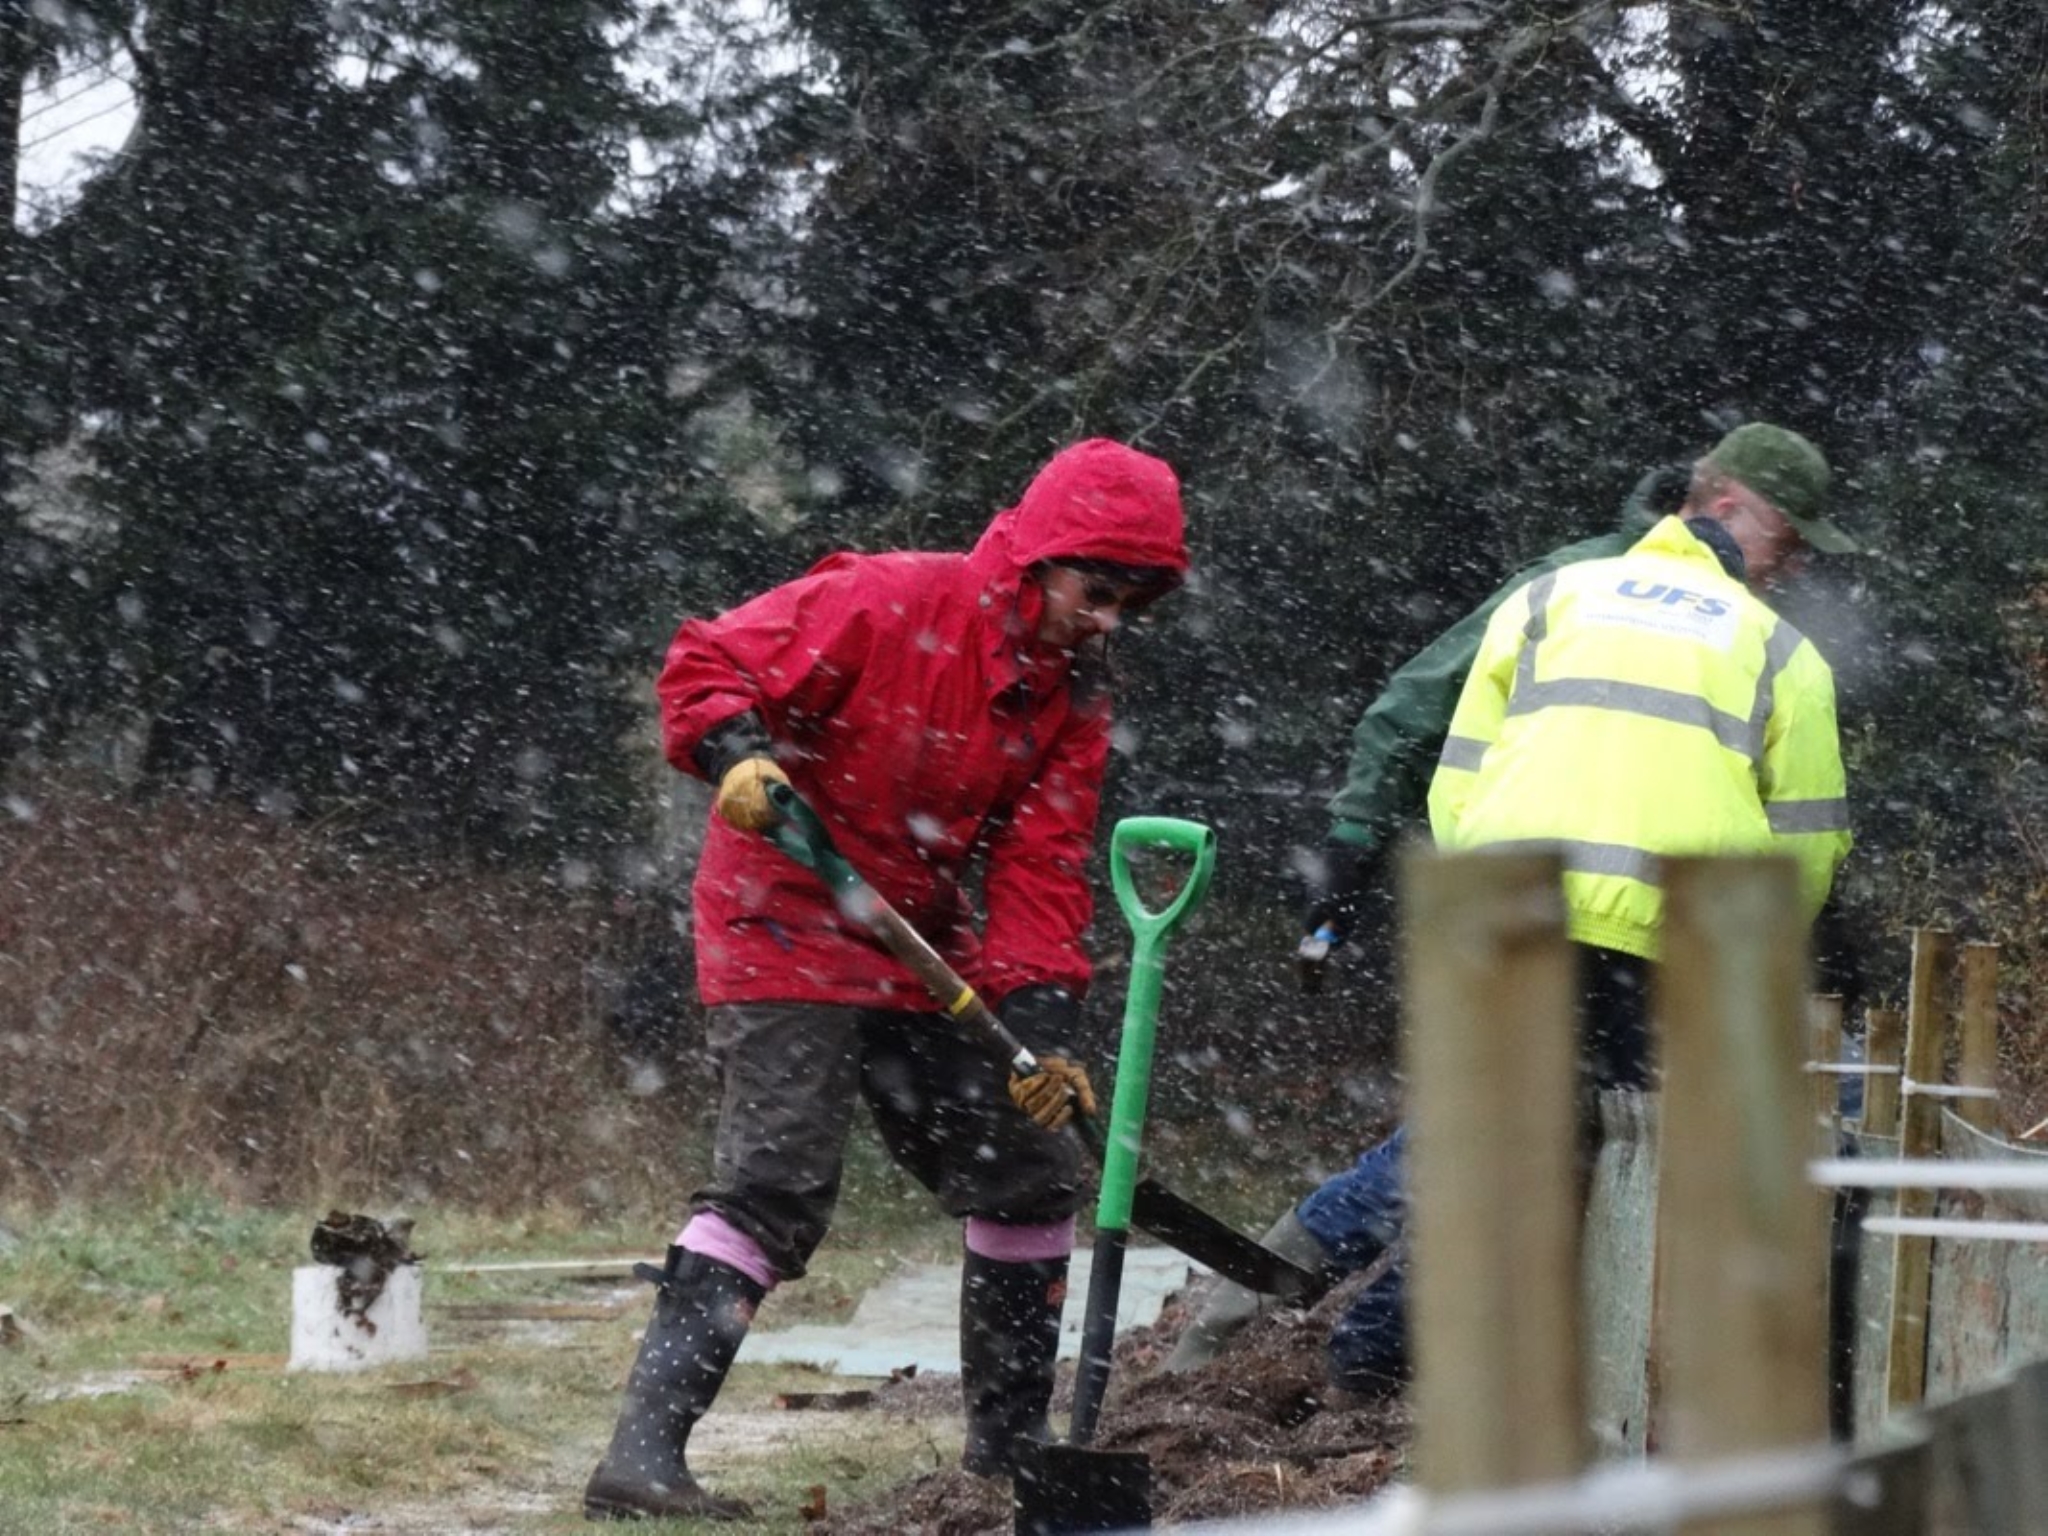 A photo from the FoTF Conservation Event - January 2018 - Erecting the Toad Fence at Cranwich : Erecting a section of the fence, as snow falls